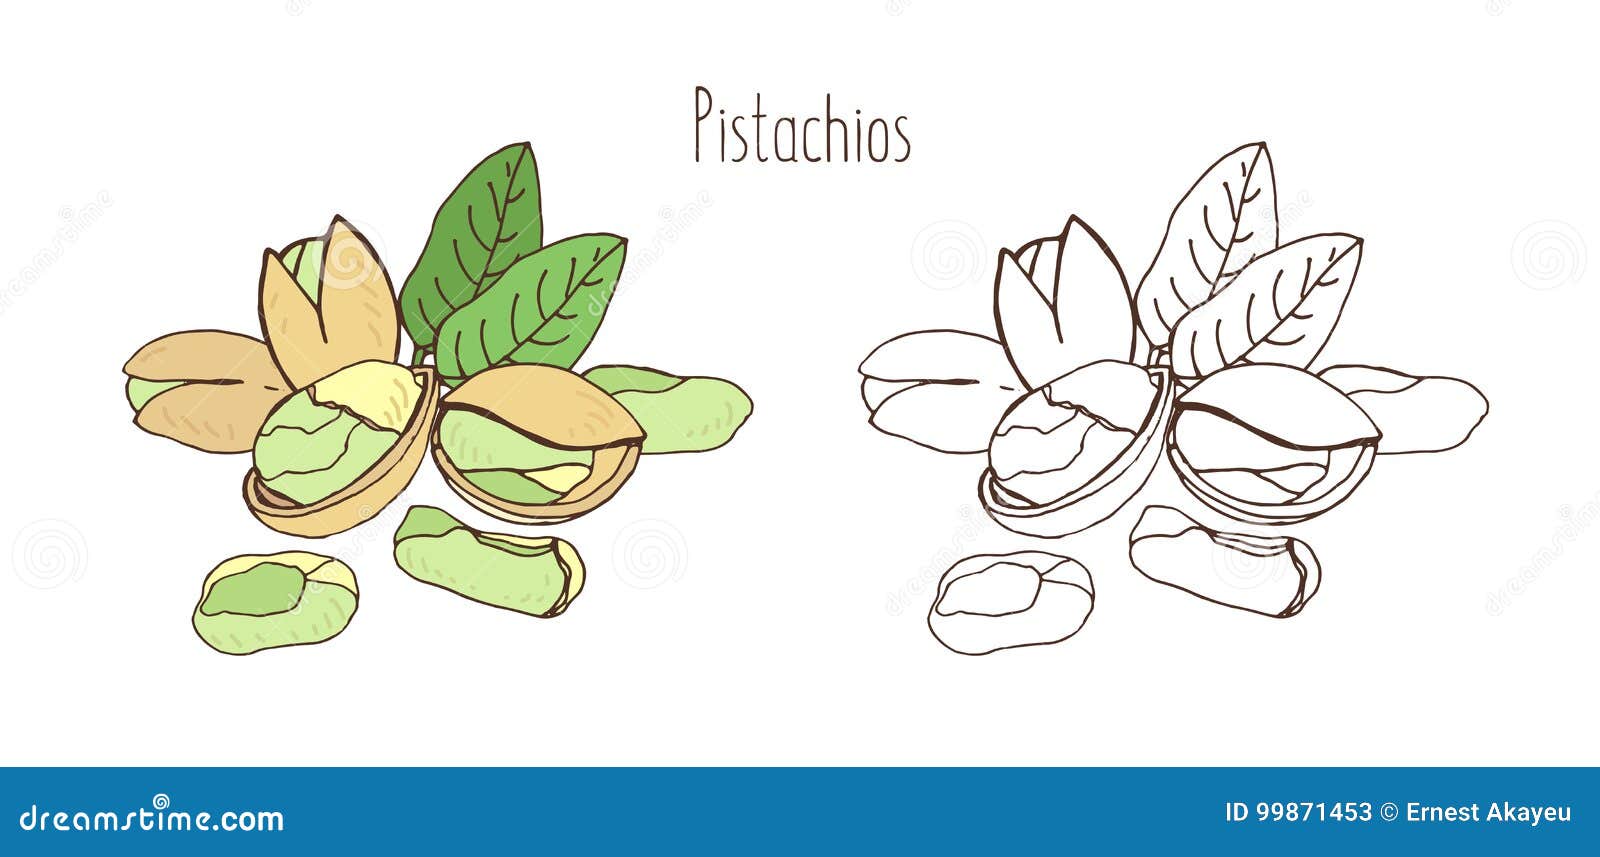 colored and monochrome drawings of pistachios in shell and shelled with pair of leaves. delicious edible drupe or nut